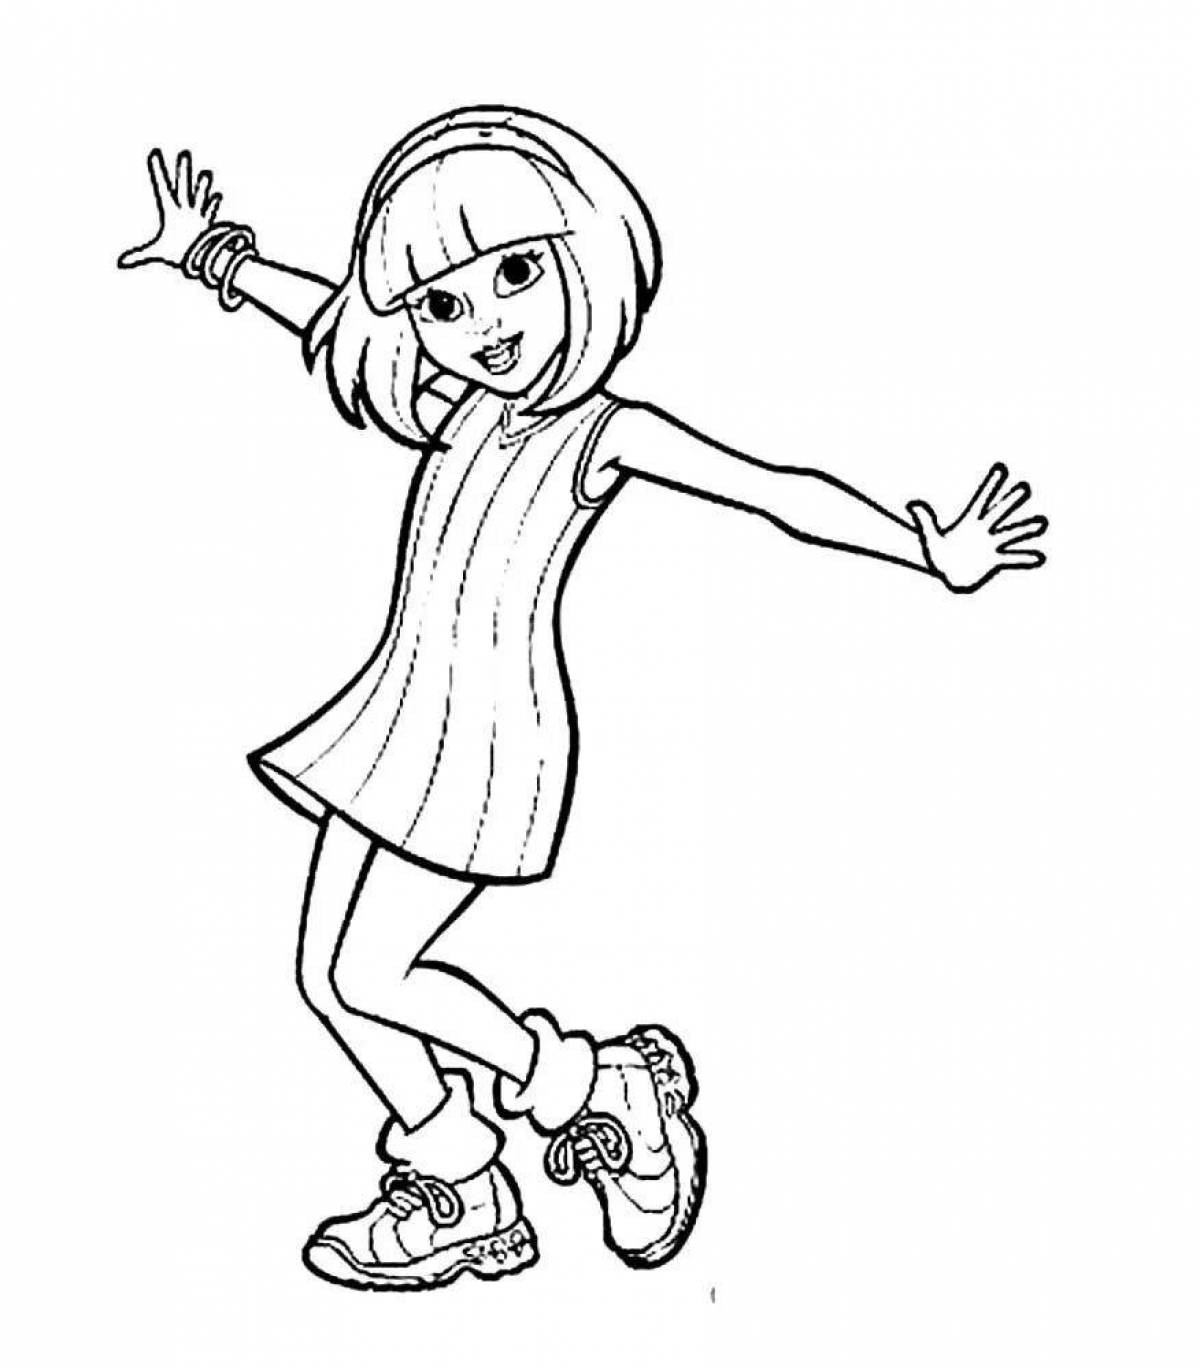 Color-explosion luana coloring page